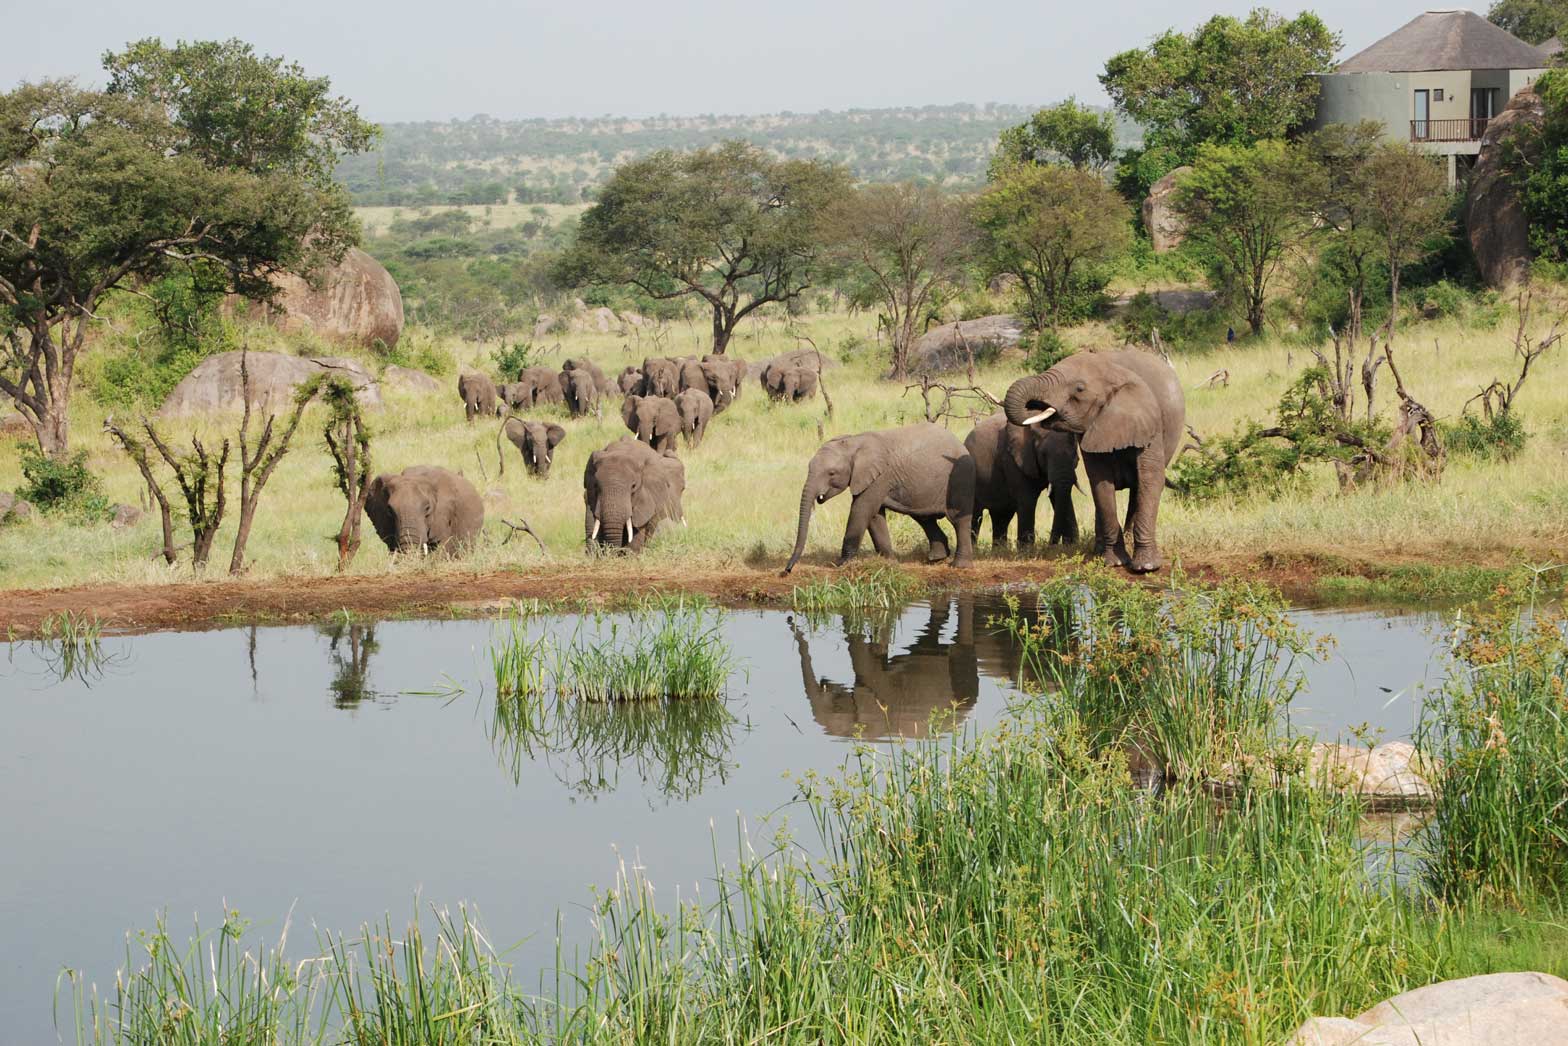 Elephants at a watering hole in the Serengeti